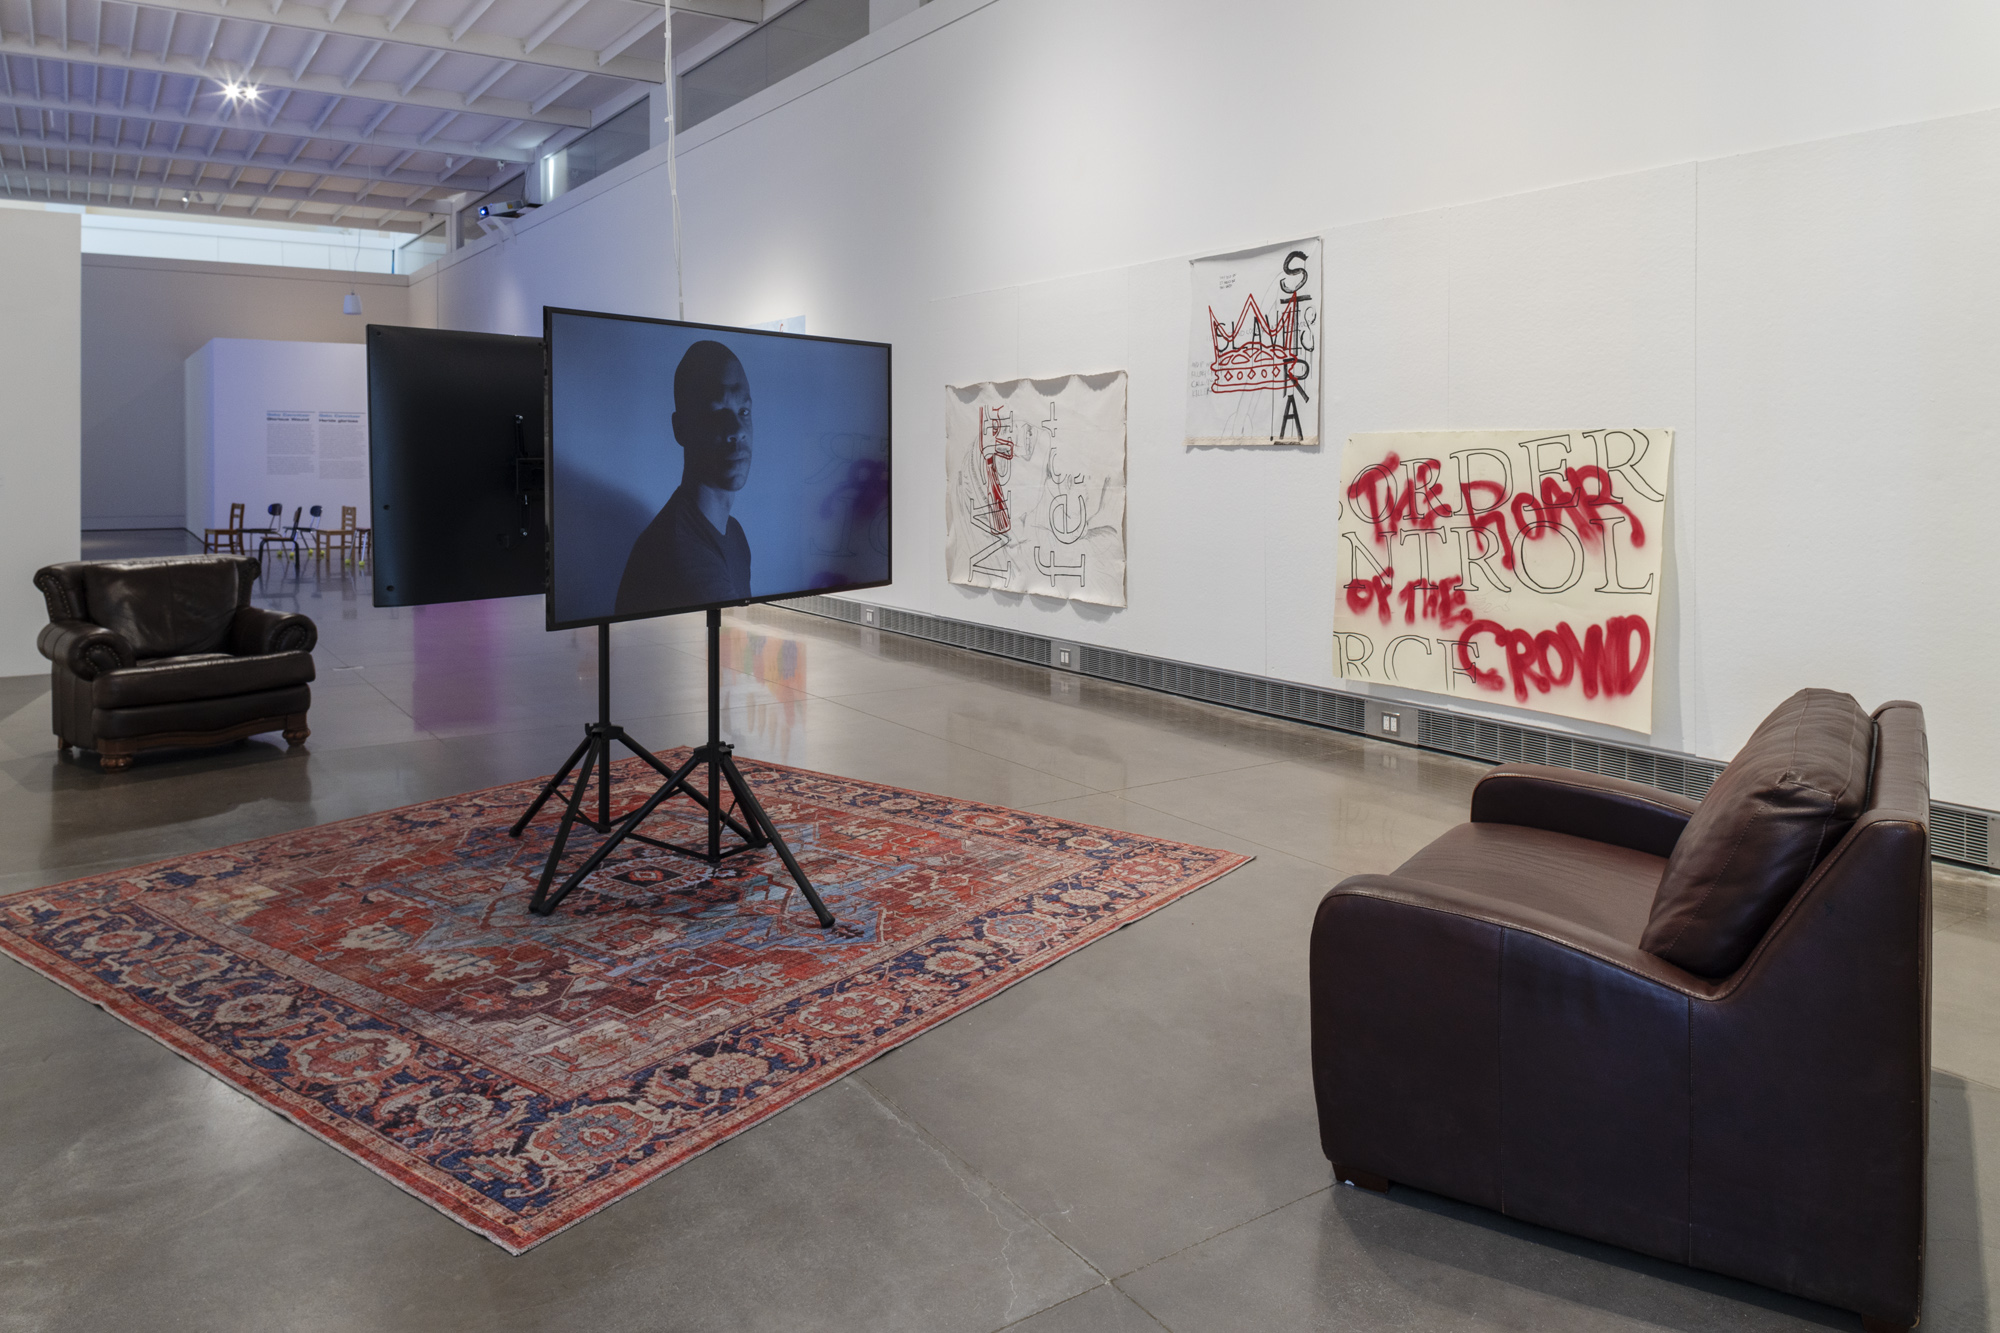 An exhibition space with text and image based art hanging on the back wall. In the center is two, flat screens on tripods facing back-to-back. The screens are centered on a red, oriental rug, in between two, brown leather armchairs. On the screen facing forward is a man against a white backdrop. The shot of him is from the bust up and he is glancing over shoulder with a still facial expression.